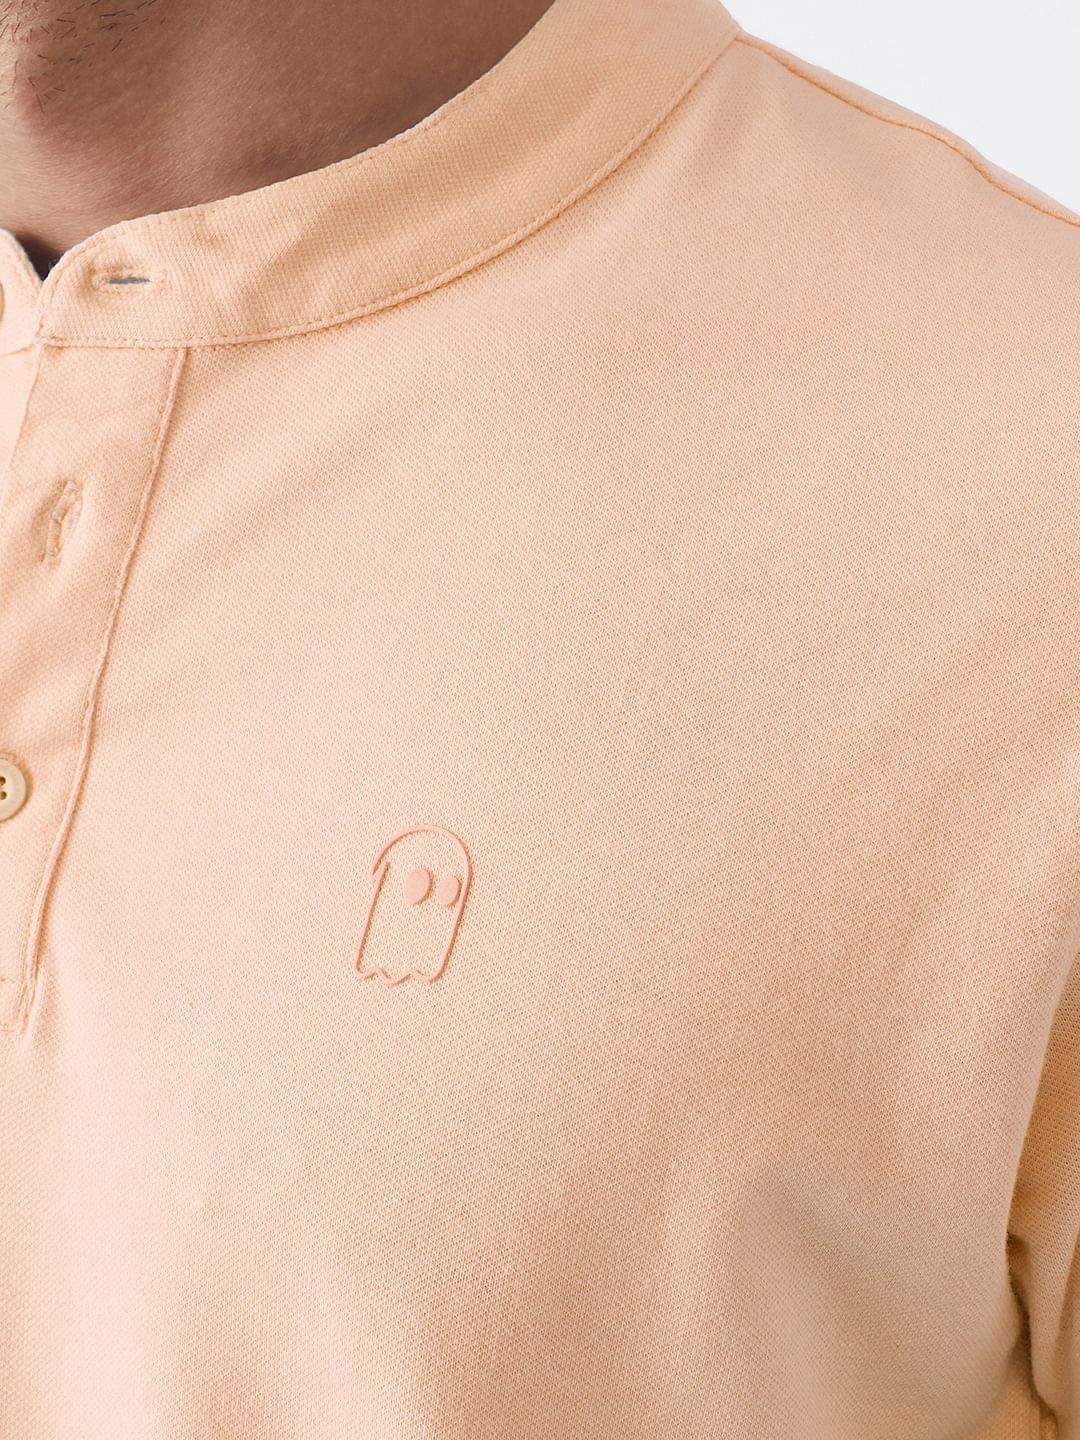 Solids Mandarin Polo: Nude Pink